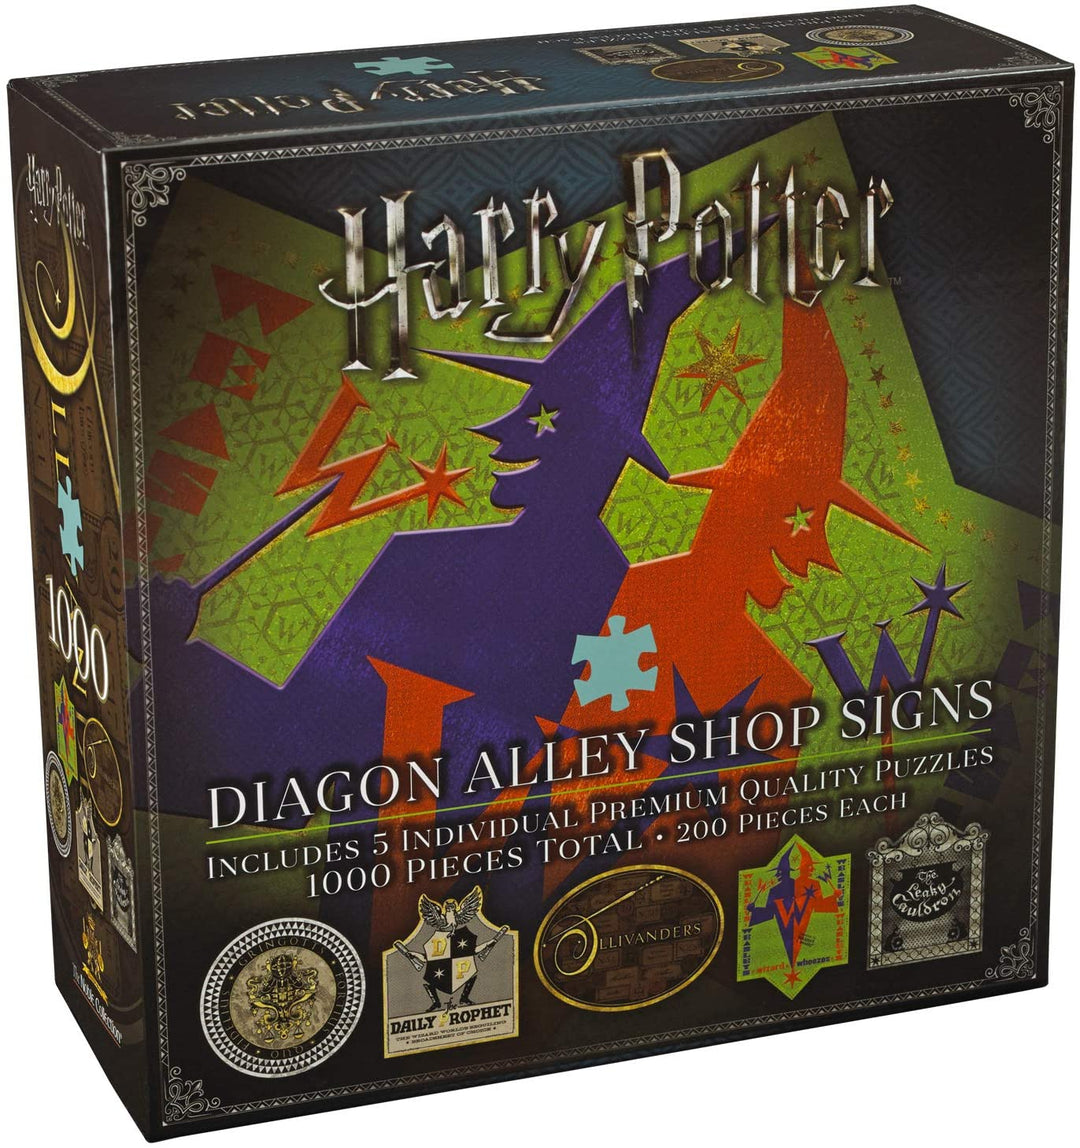 The Noble Collection 5x Diagon Alley Shop Signs 200-teilige Puzzles